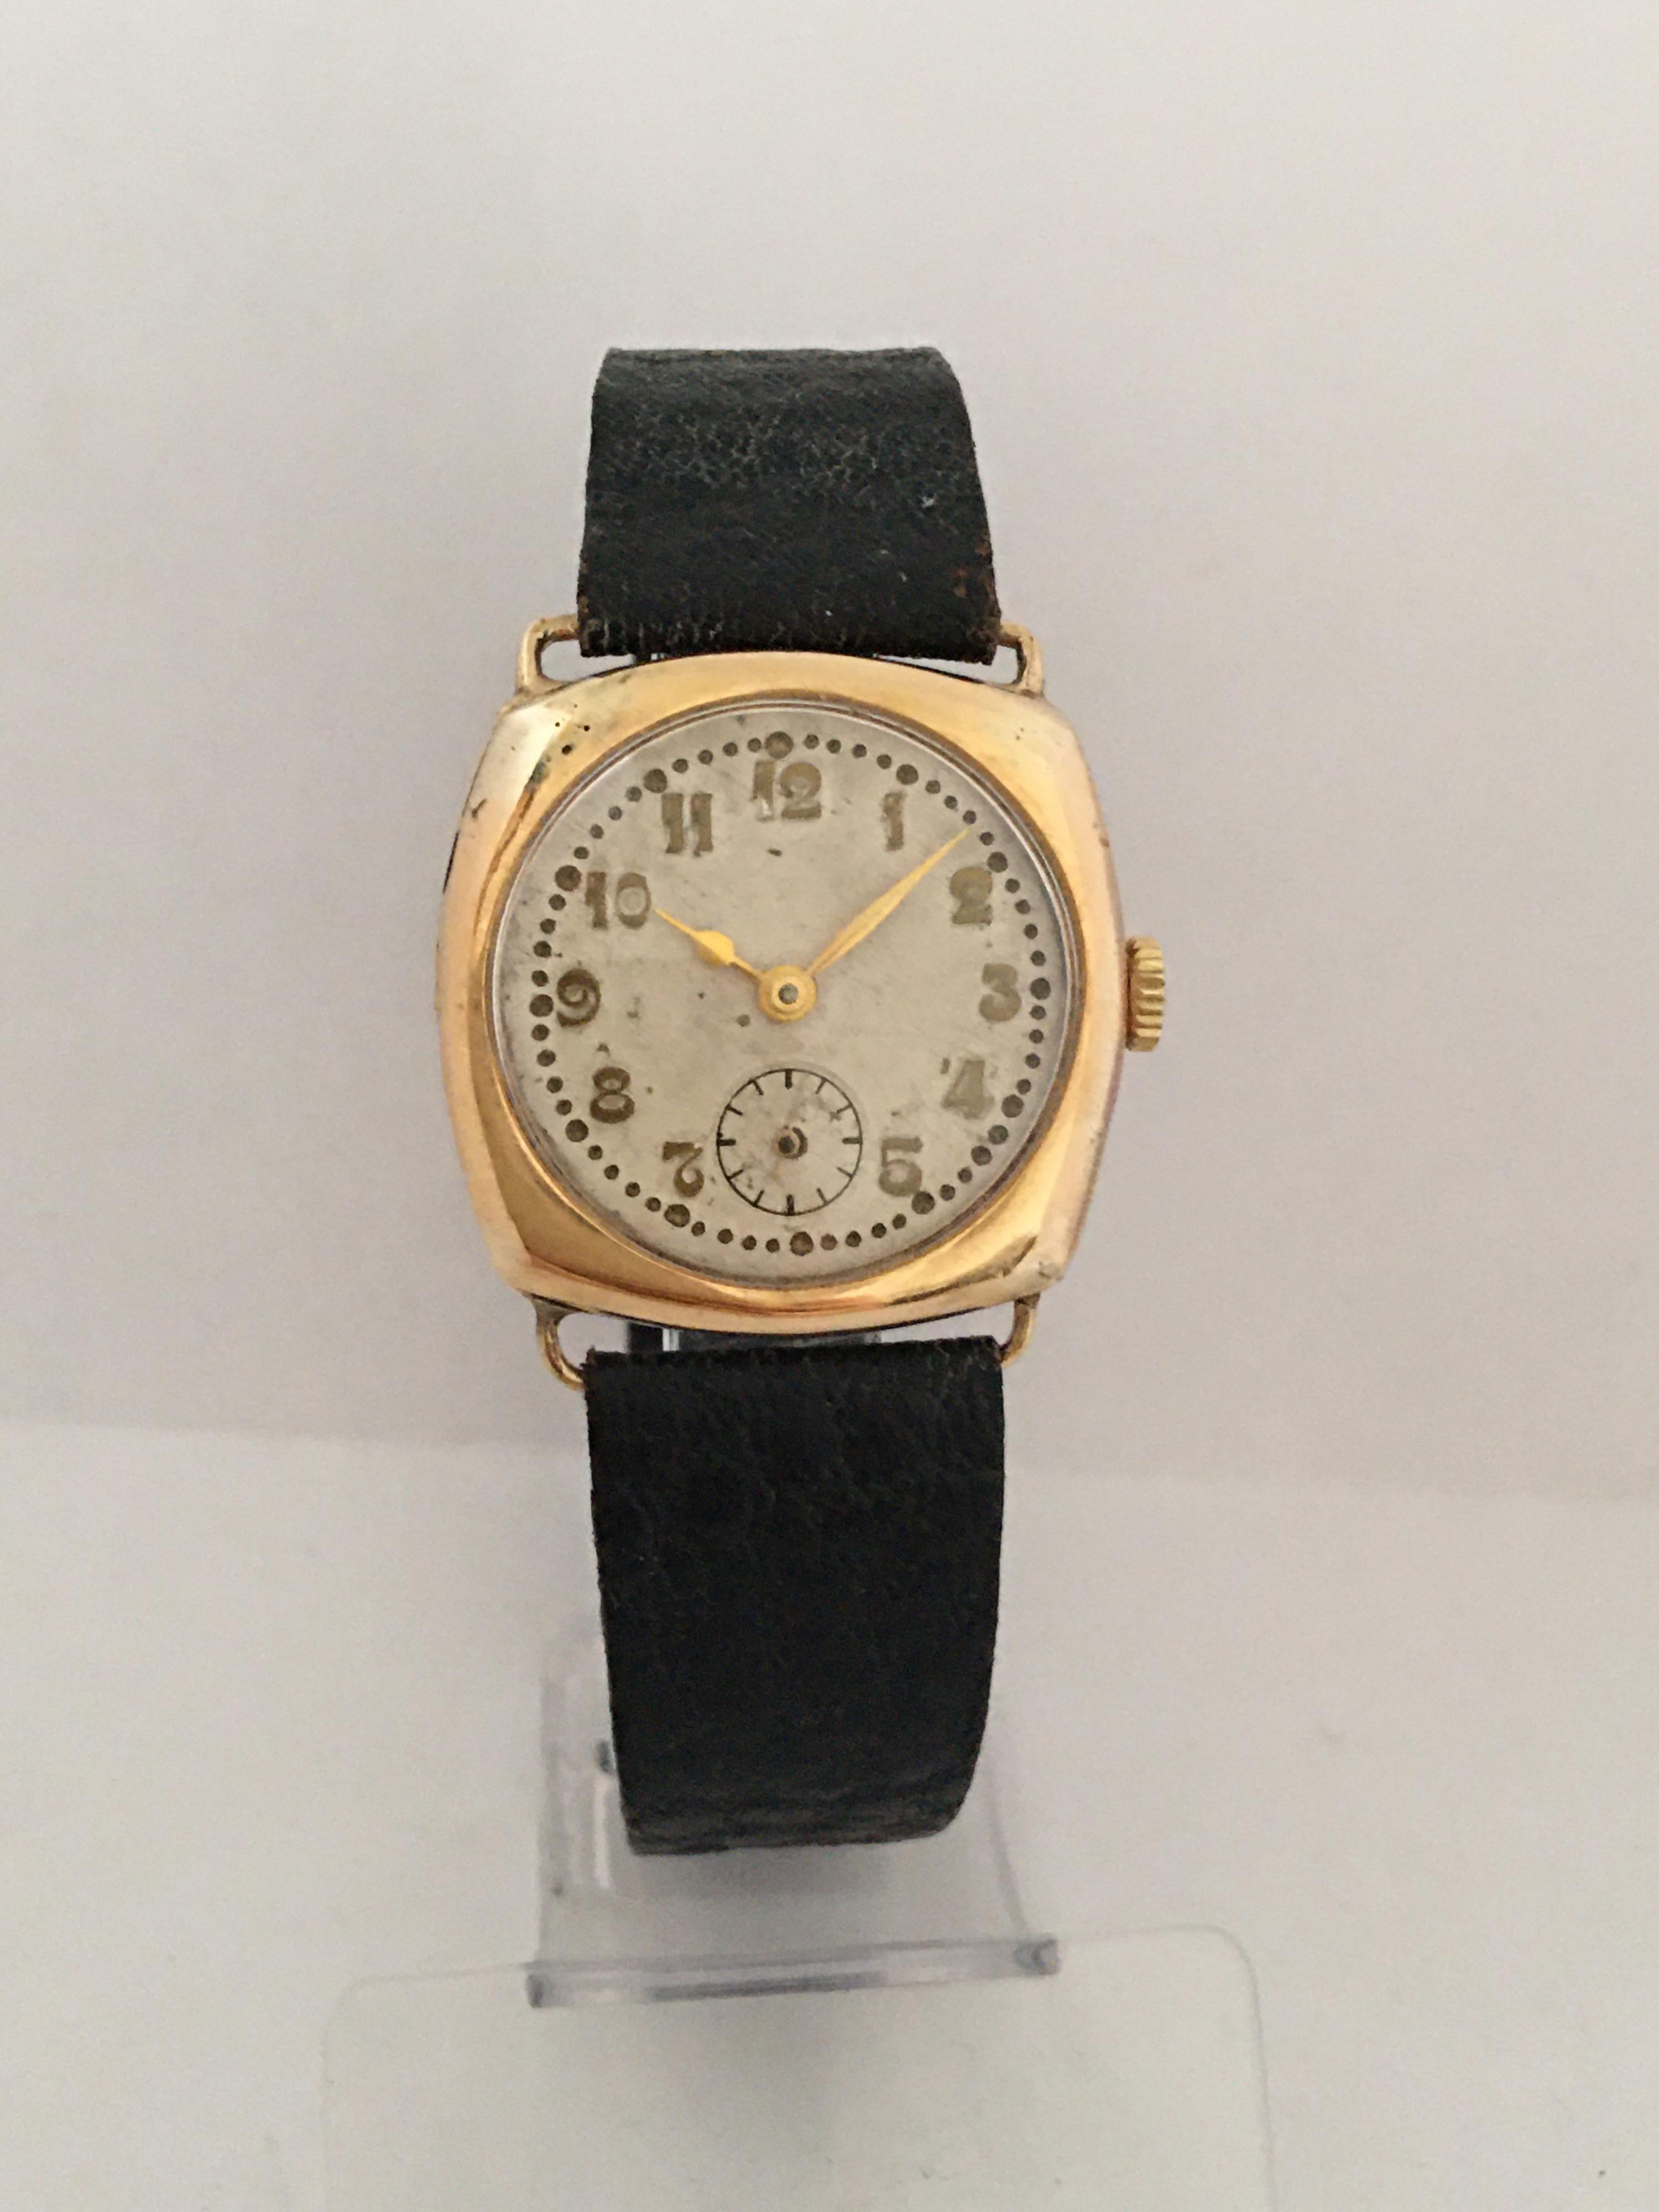 14 Karat Gold Vintage 1950s HERA Swiss Mechanical Watch In Good Condition For Sale In Carlisle, GB